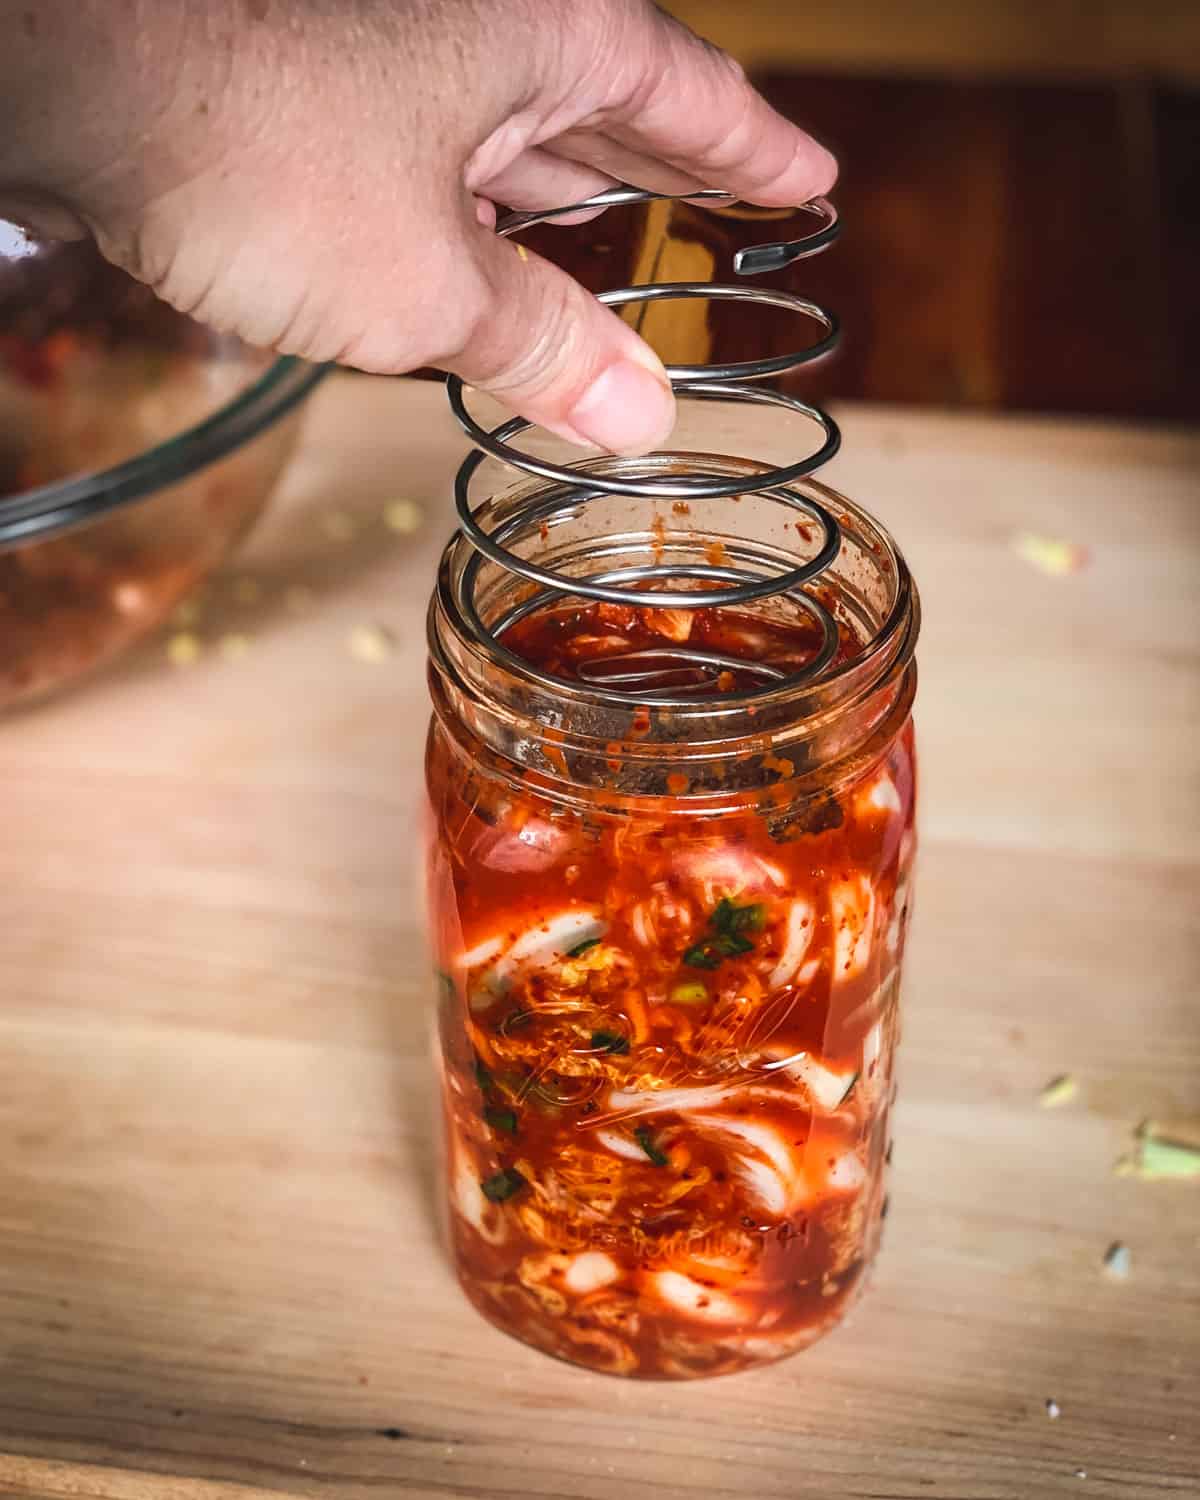 putting the fermenting spring into the jar of kimchi